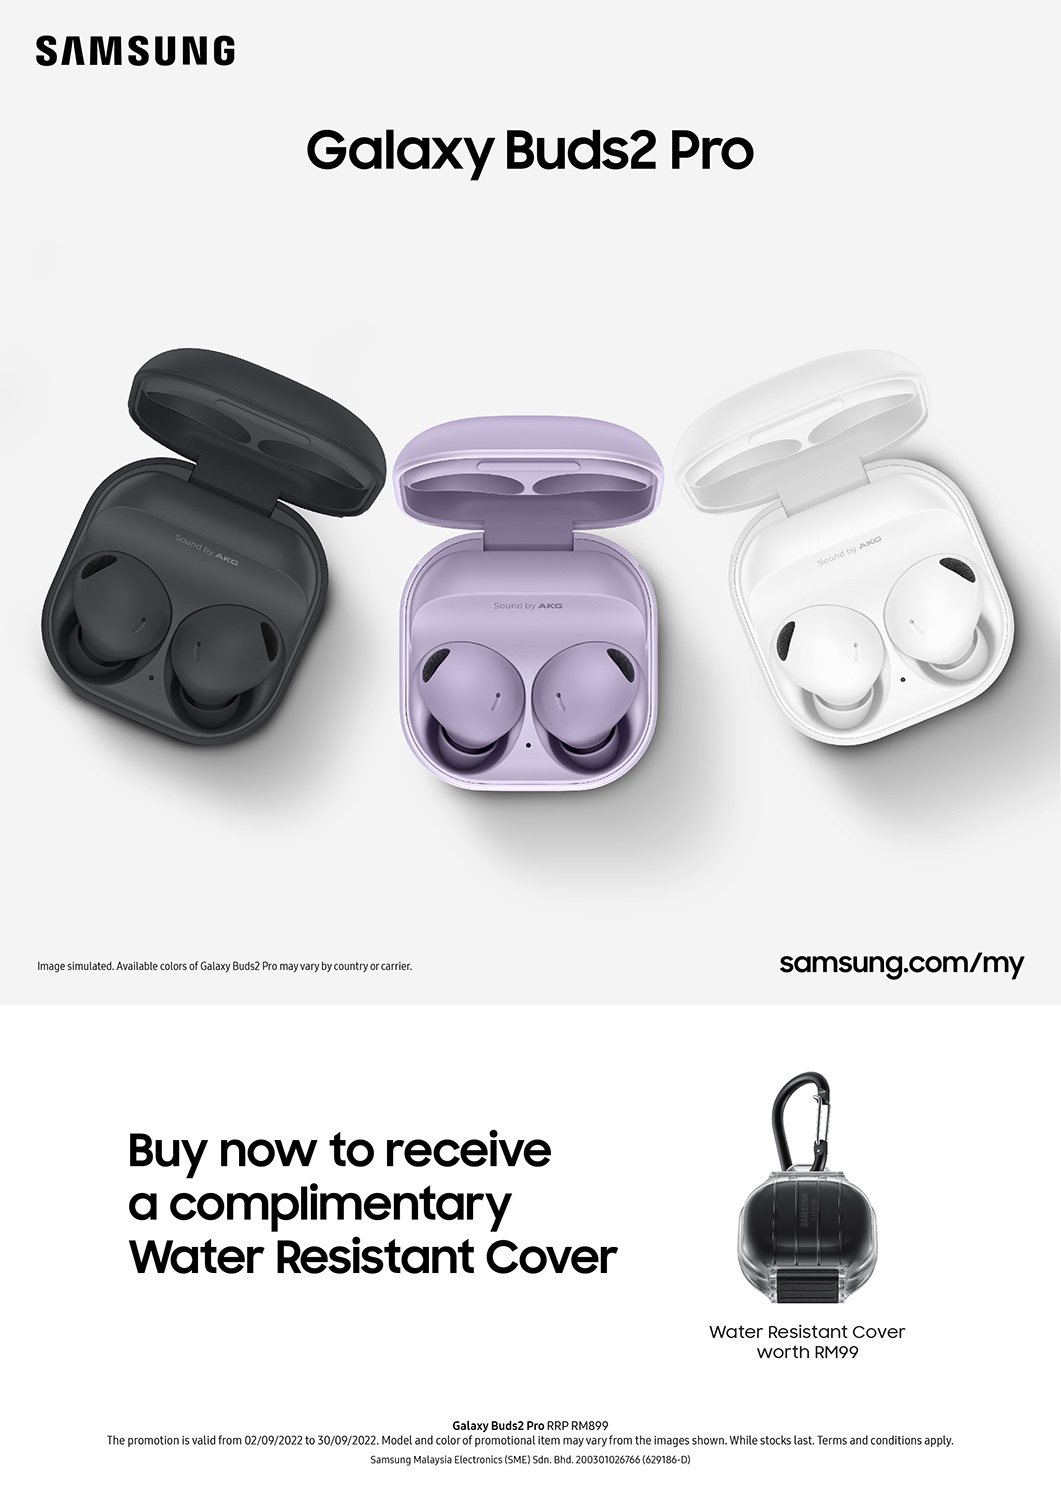 Say Goodbye to Neck Problems With Galaxy Buds2 Pro